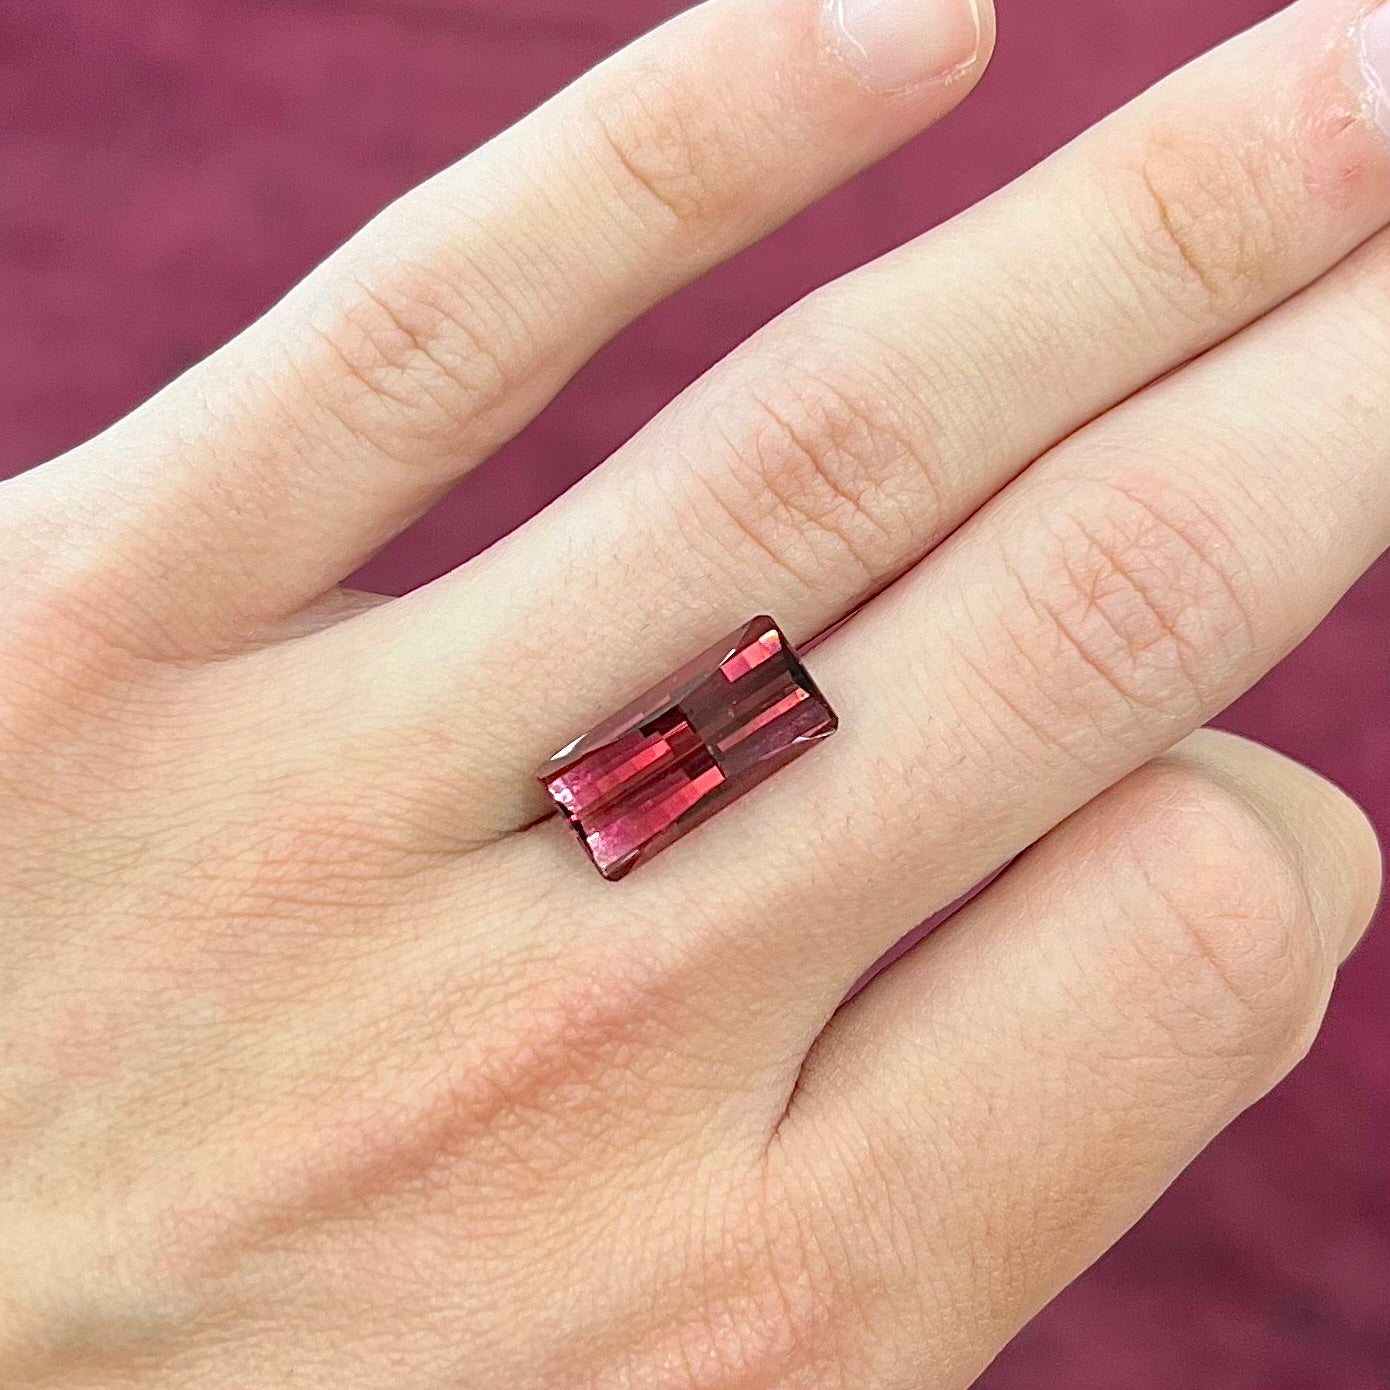 A loose, fantasy cut reddish colored tourmaline.  The cut reflects light in a way that resembles digital pixels on a screen.